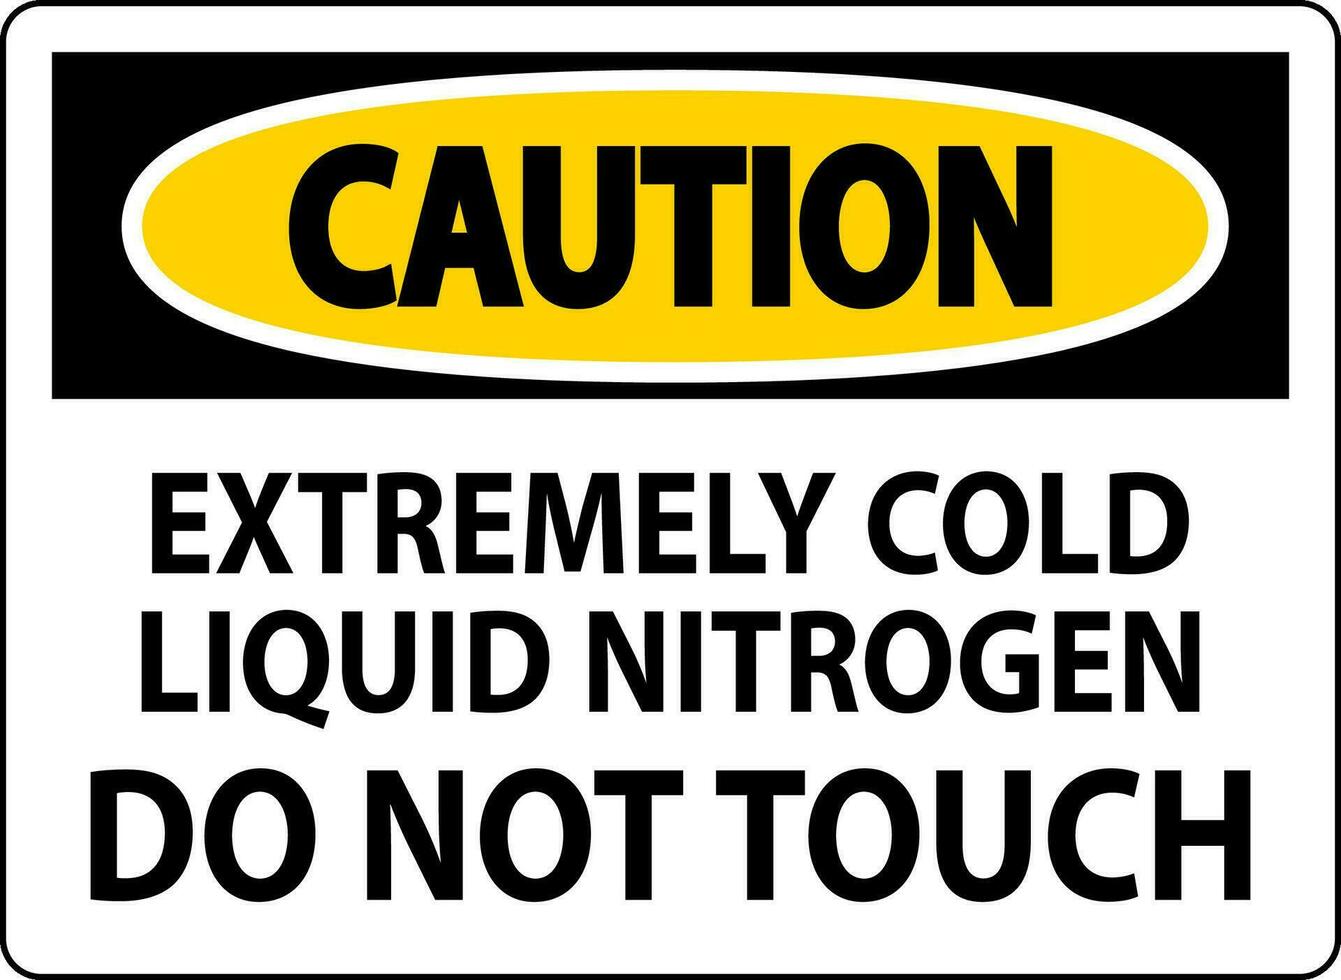 Caution Sign Extremely Cold Liquid Nitrogen Do Not Touch vector